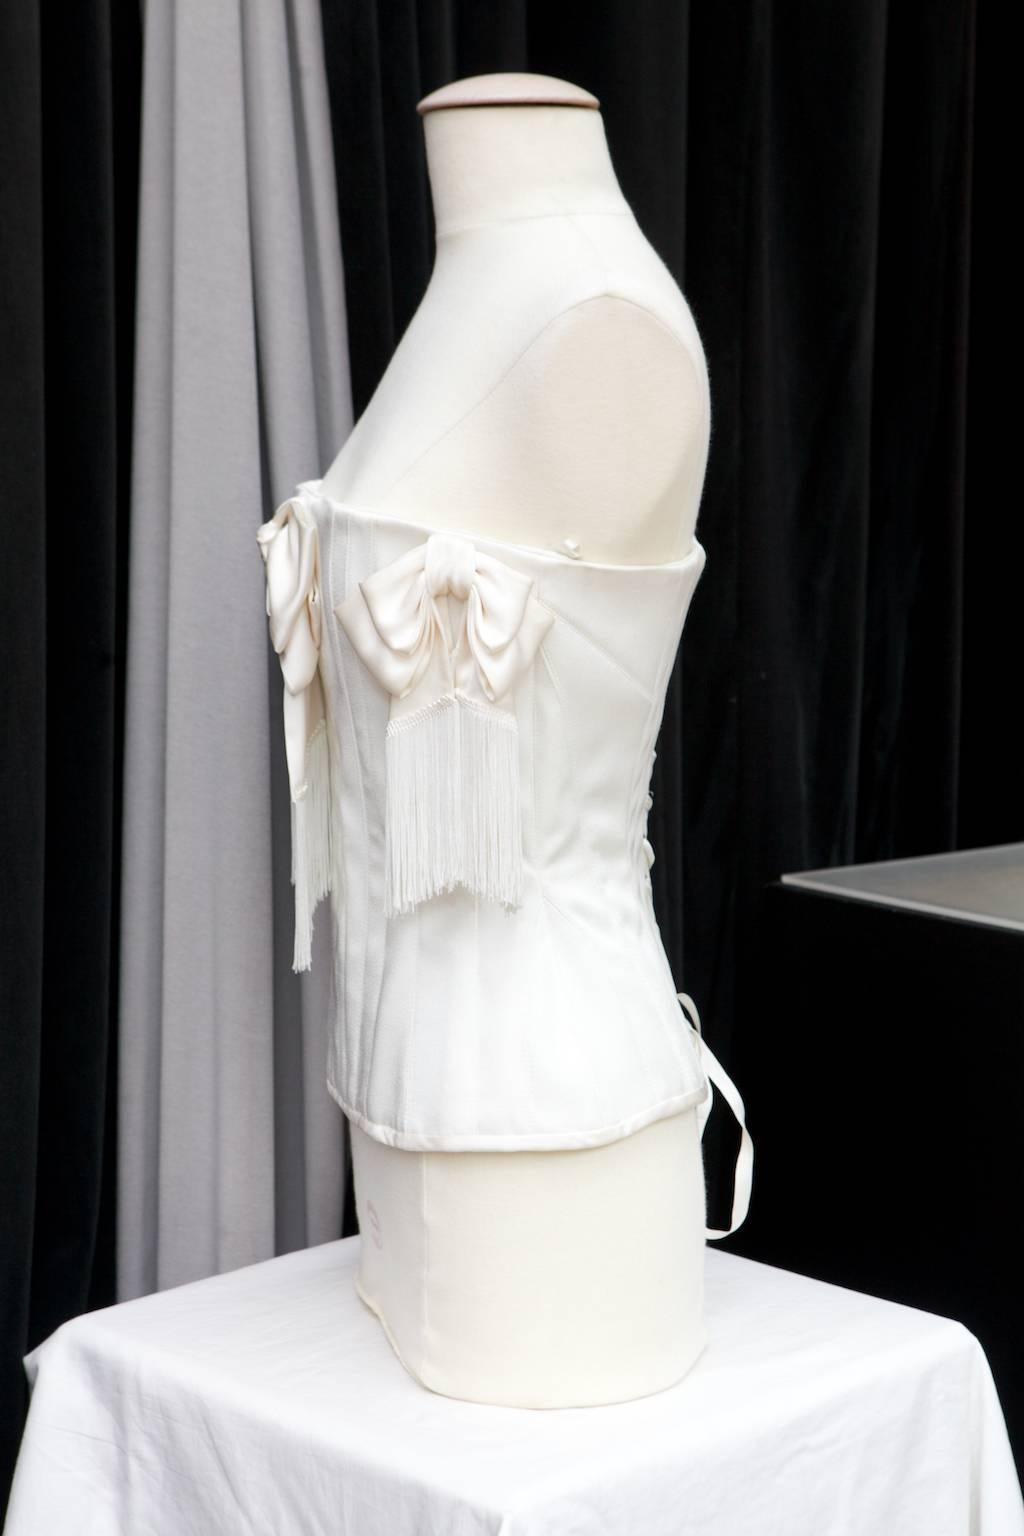 JOHN GALLIANO (Made in France) Corset in white satin in a victorian style decorated with three large bows with dropping fringes around the chest.

The bustier fits perfectly the waist thanks to semi flexible reinforcements and a lace work at the